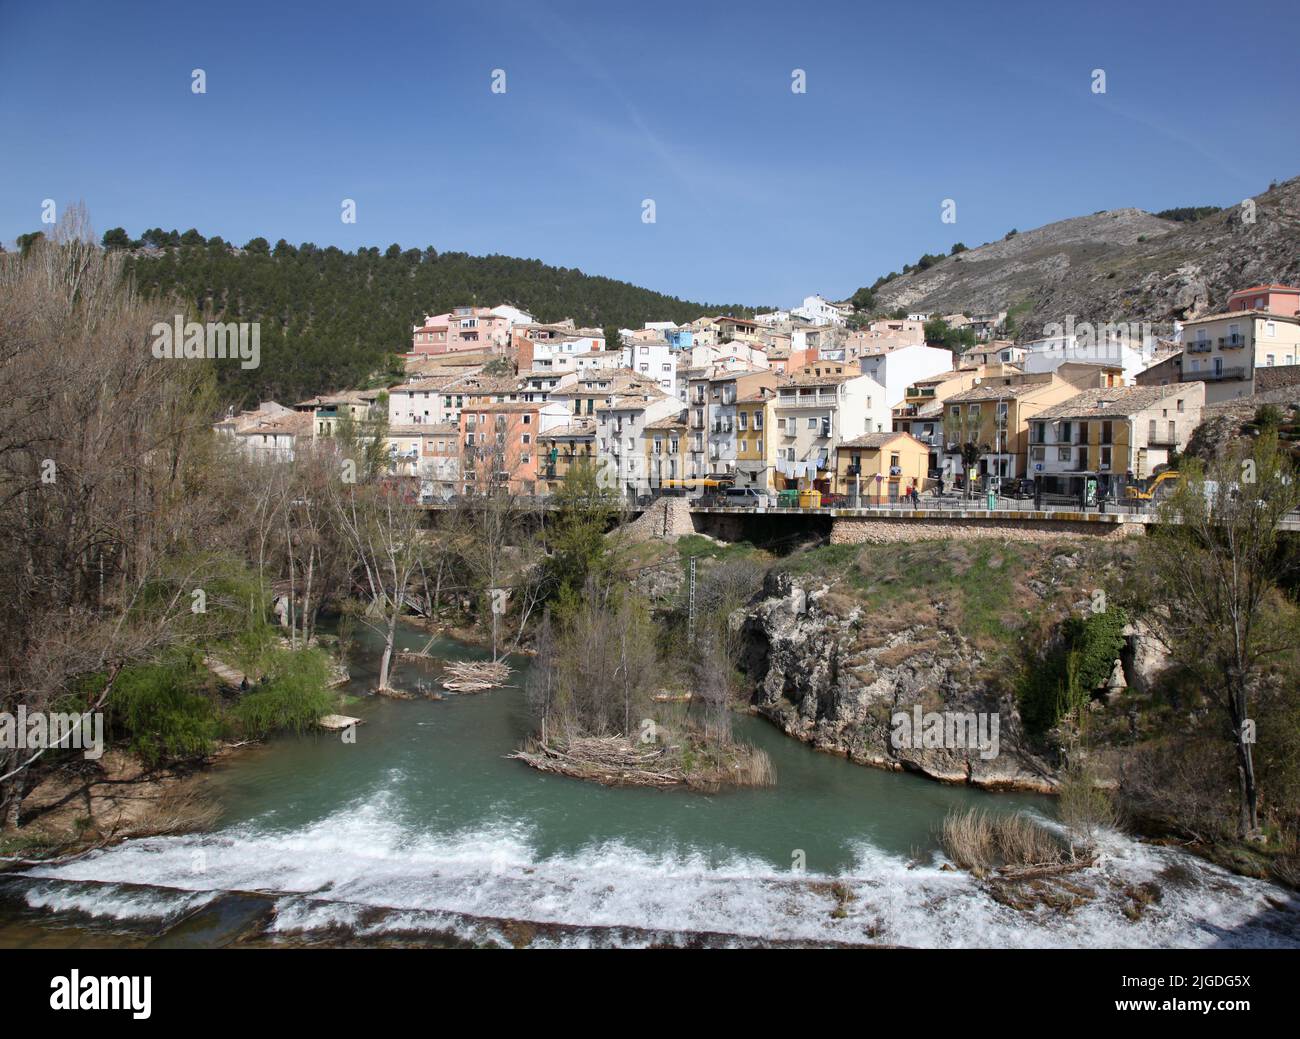 View across Rio Jucar of Cuenca Spain. This tourist destination is a world heritage site. Stock Photo